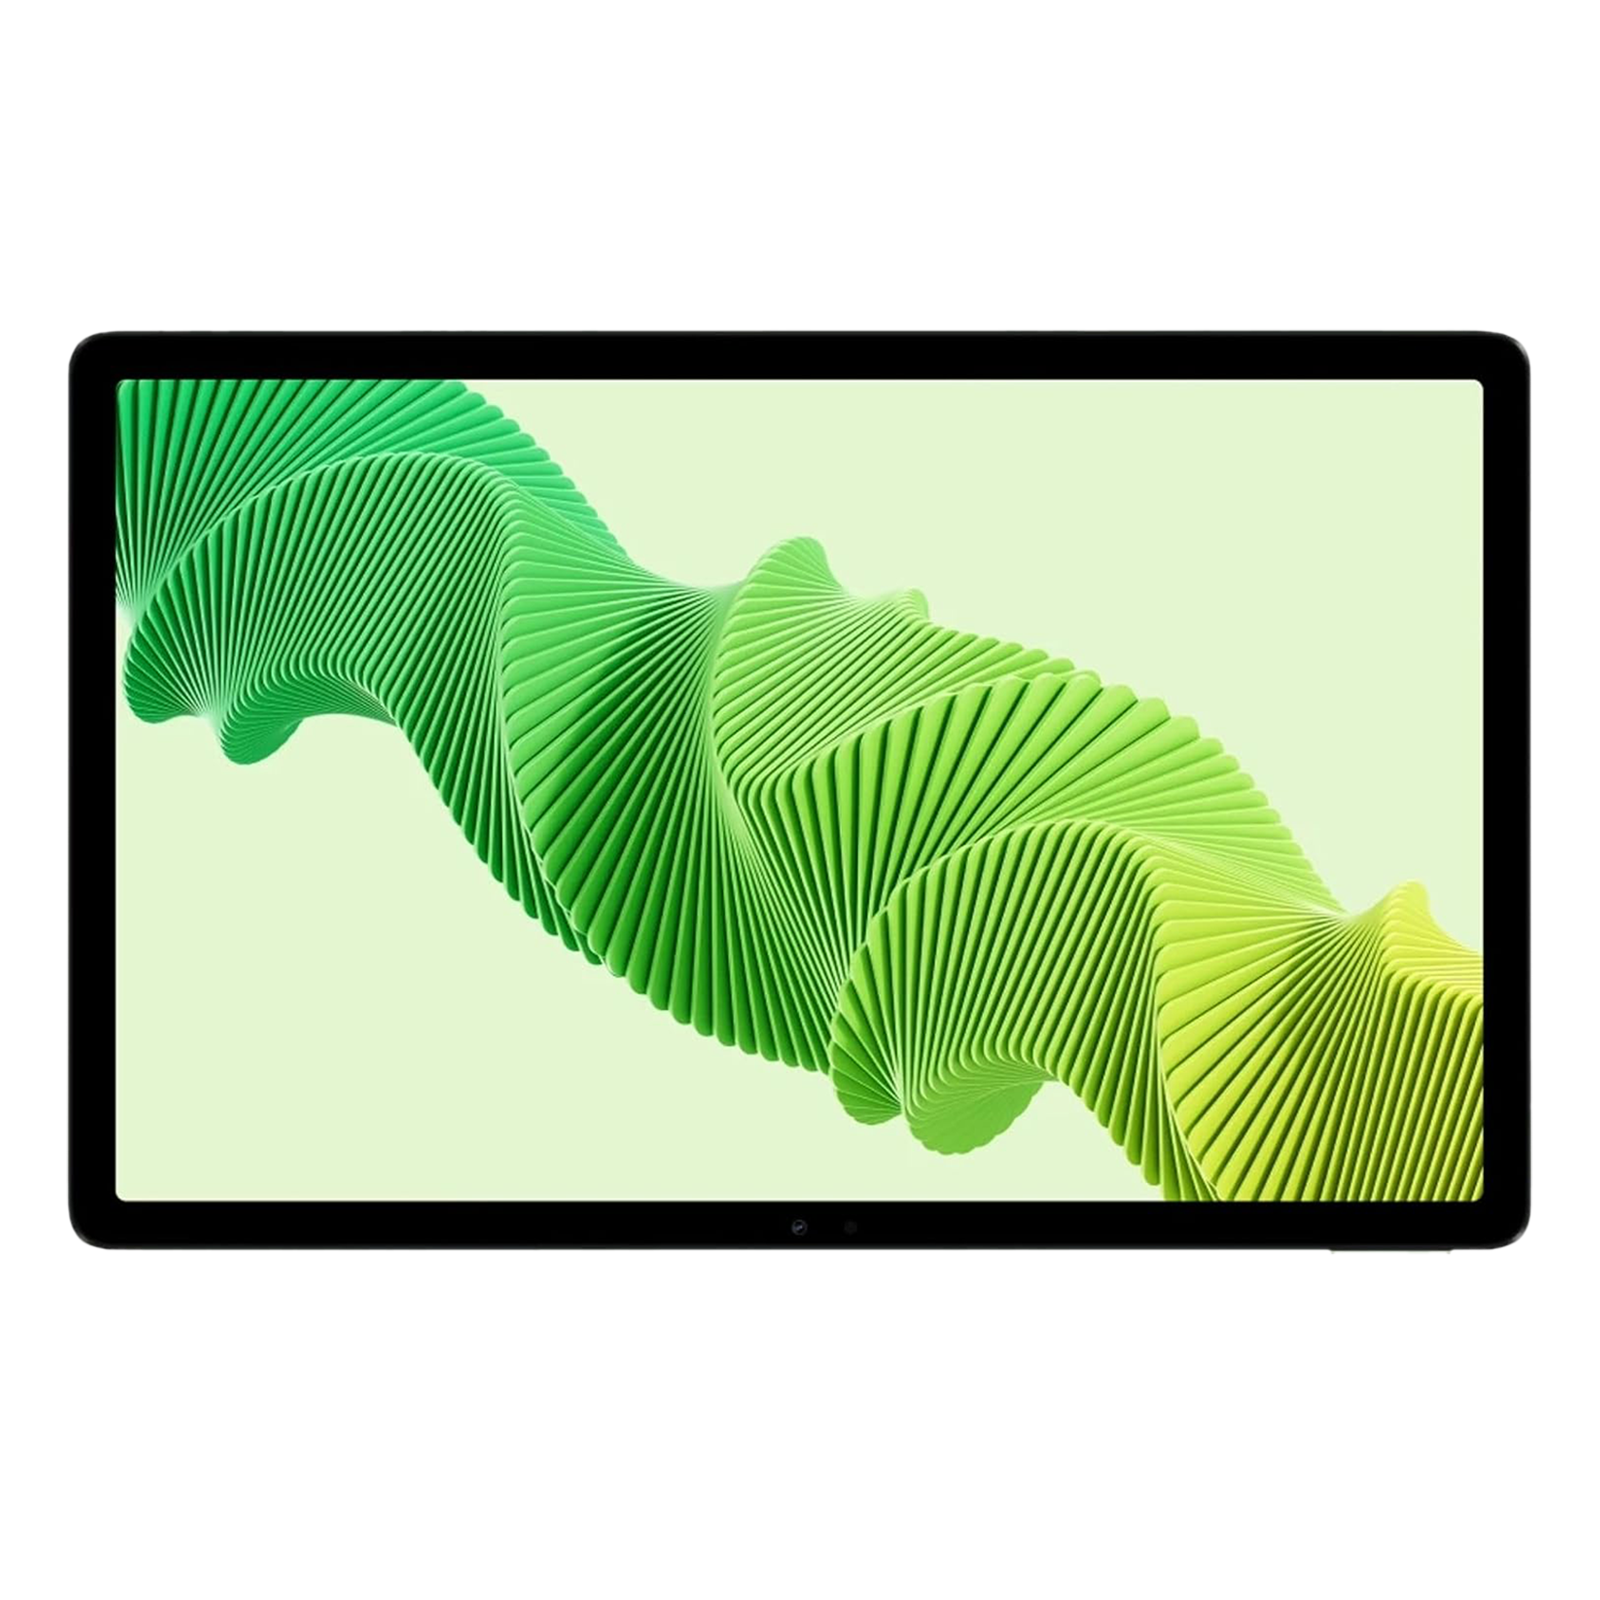 realme Pad 2 Wi-Fi+4G Android Tablet (11.5 Inch, 6GB RAM, 128GB ROM, Imagination Green)